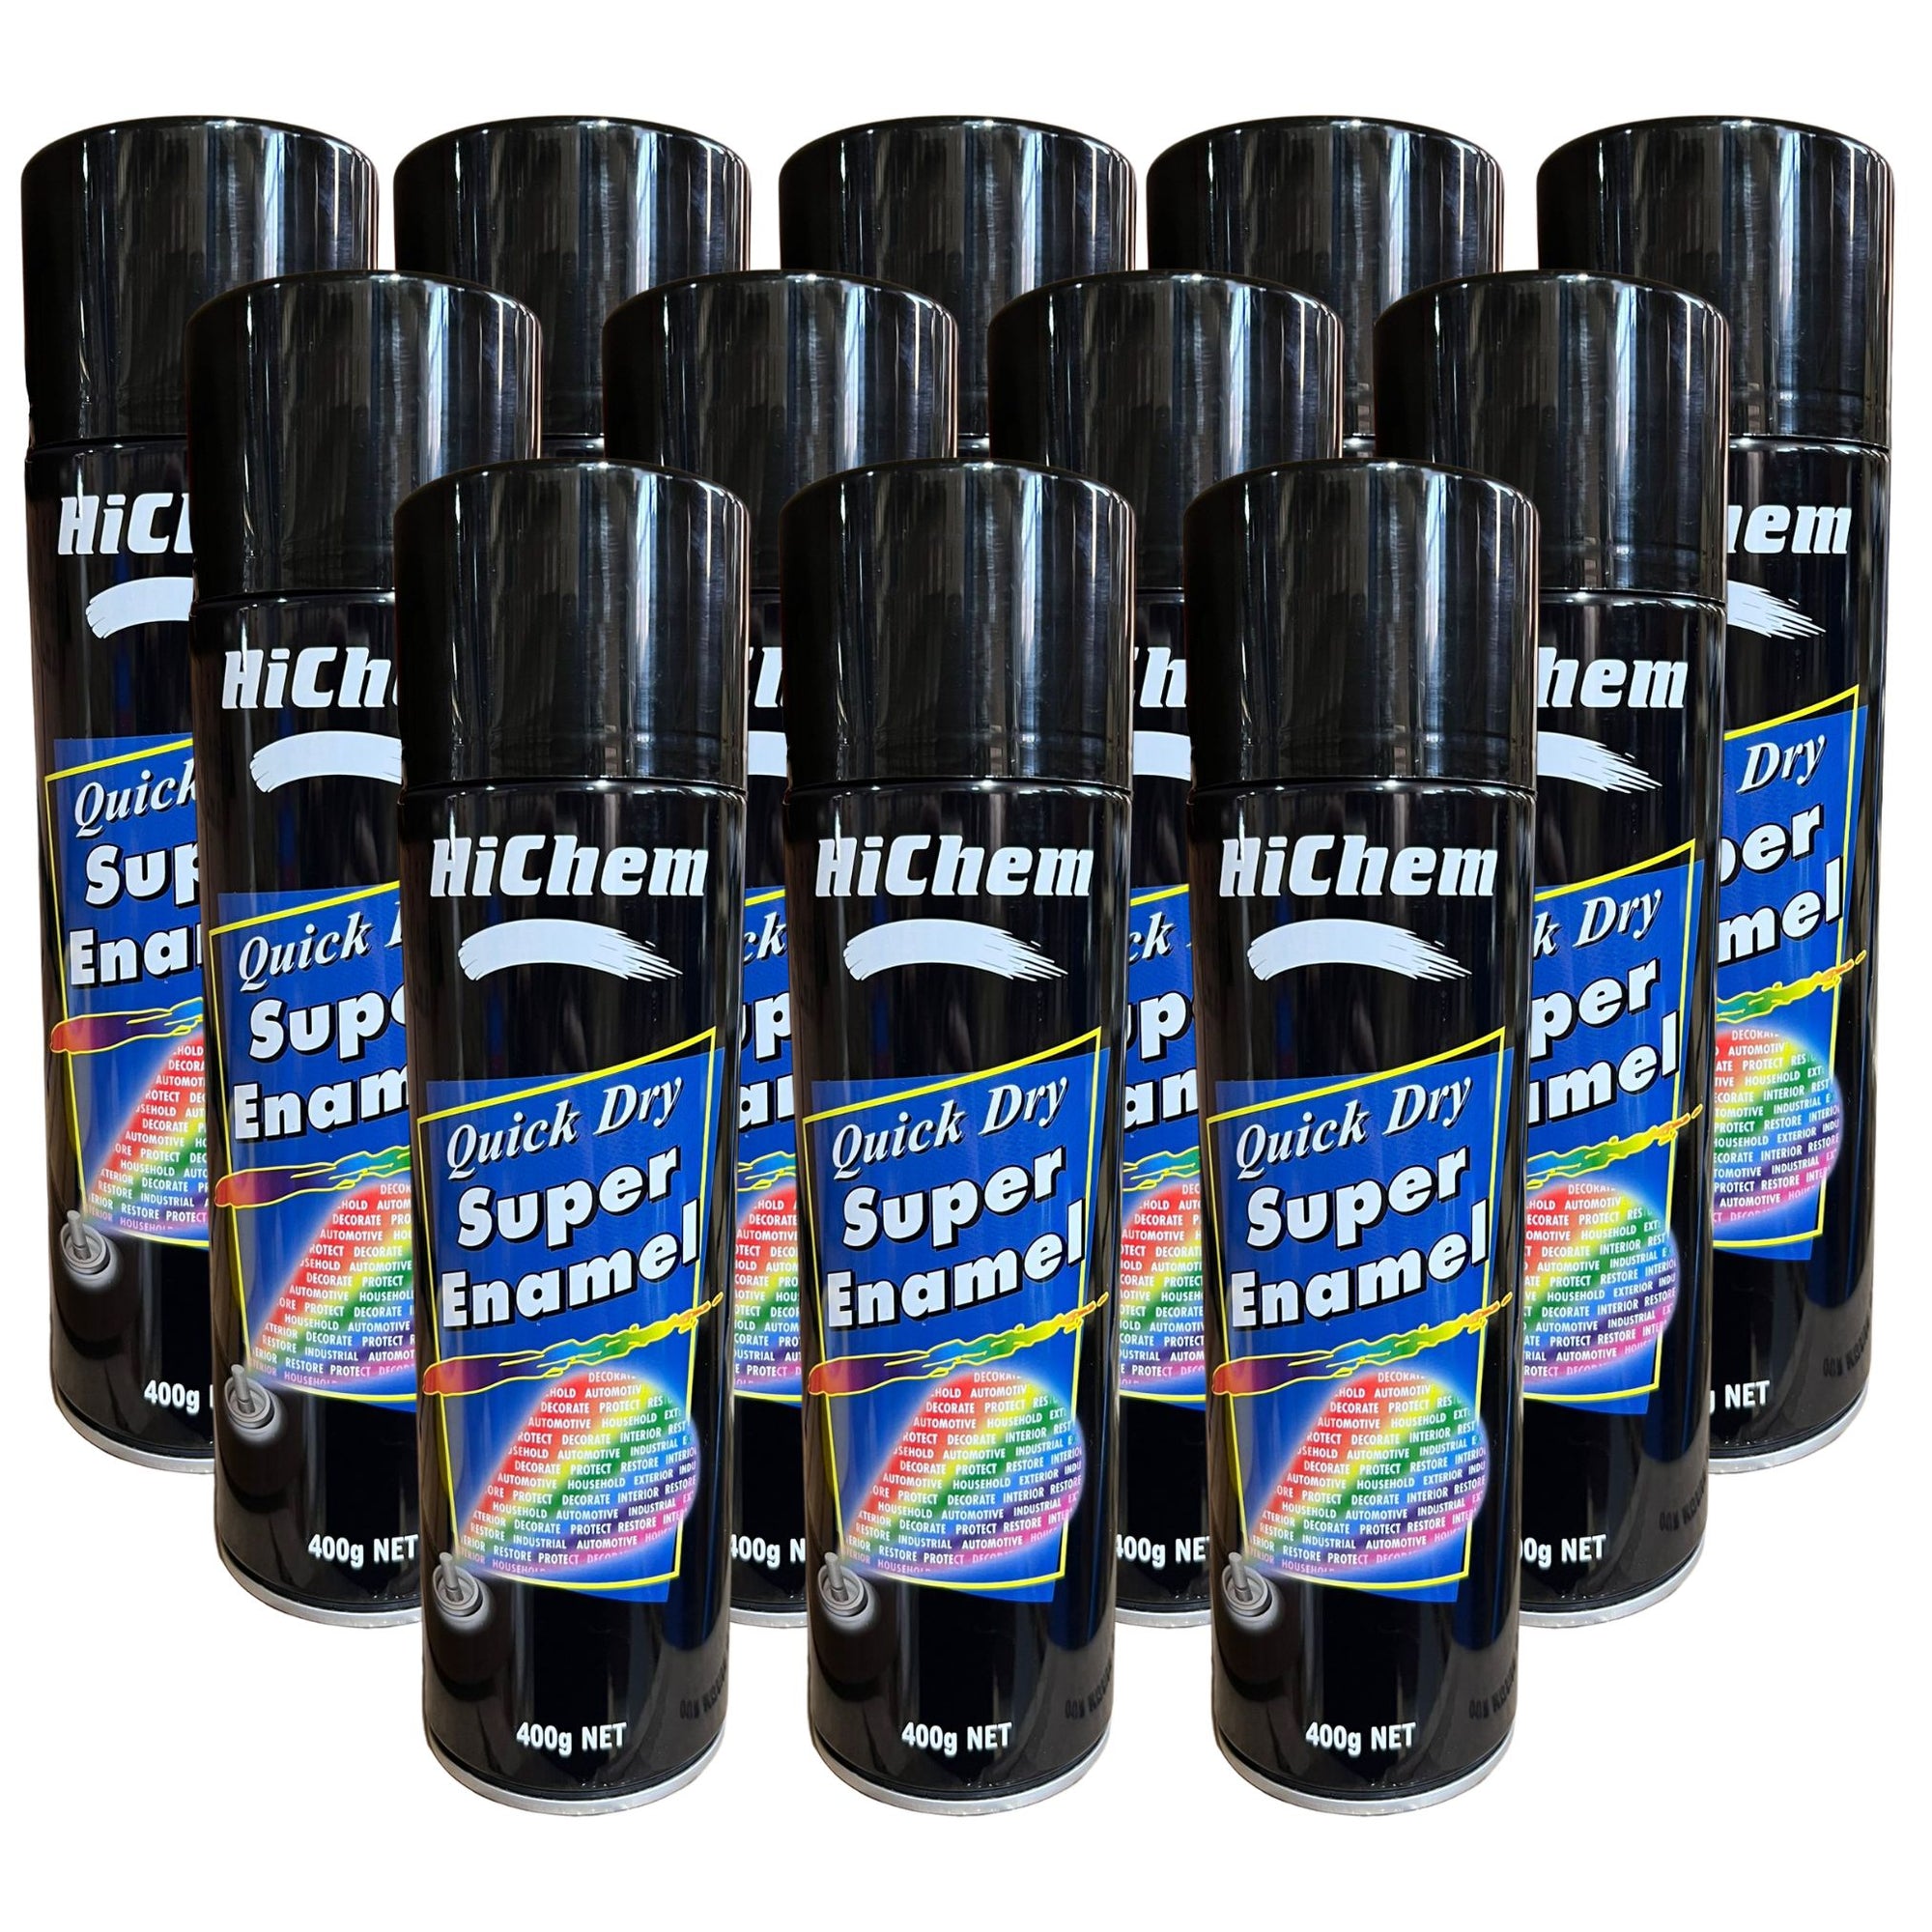 Hichem Quick Dry Super Enamel Spray Paint 12 Cans - Gloss Black - South East Clearance Centre